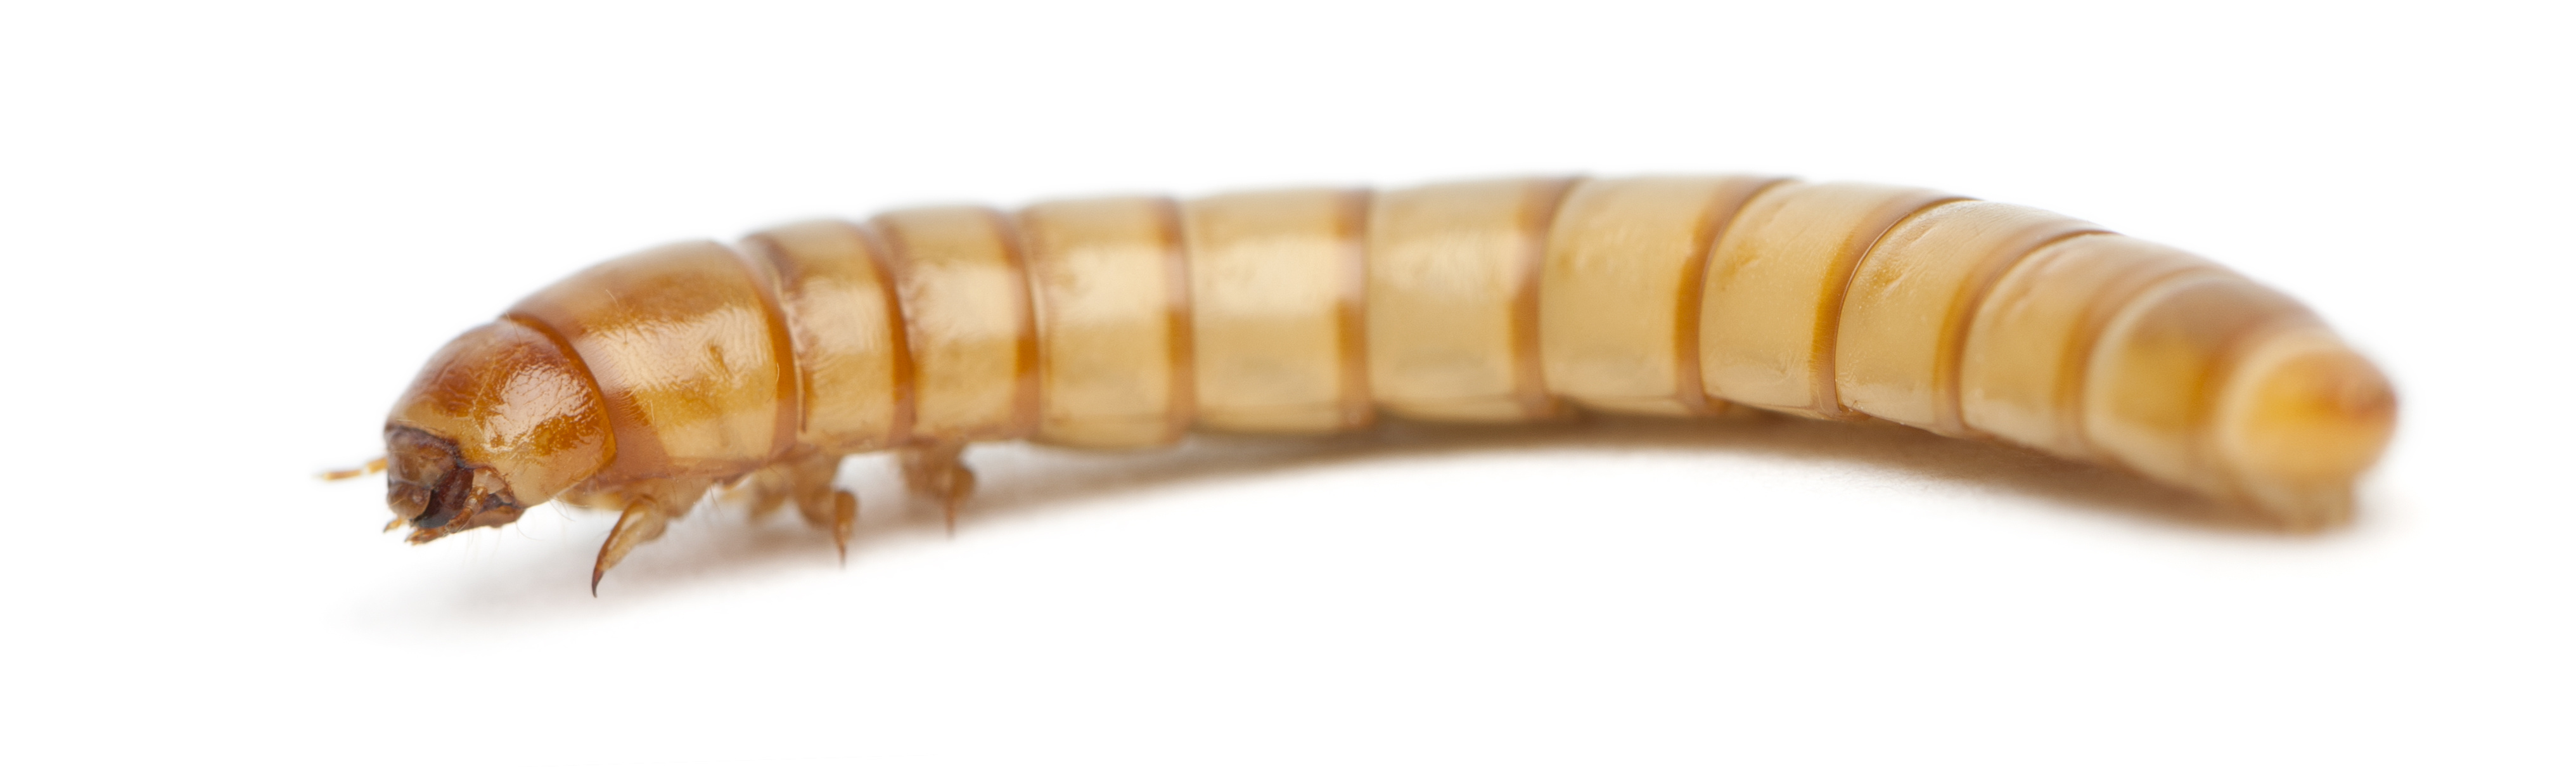 Mealworm - Insectus feed for insect farming